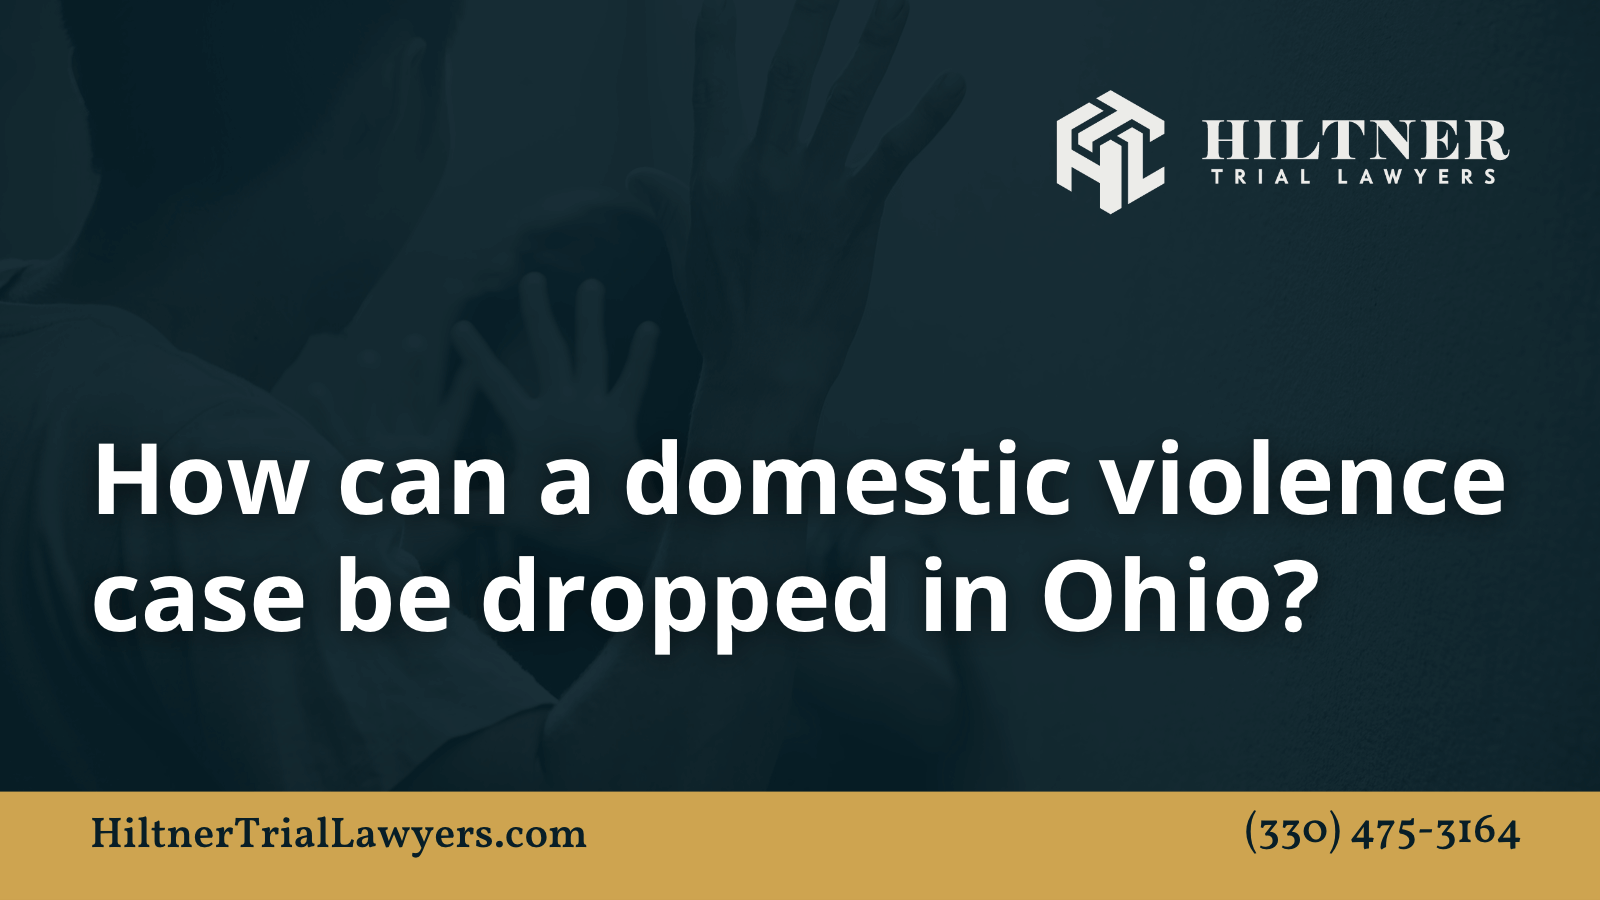 How can a domestic violence case be dropped in Ohio - Hiltner Trial Lawyers Ohio - max hiltner